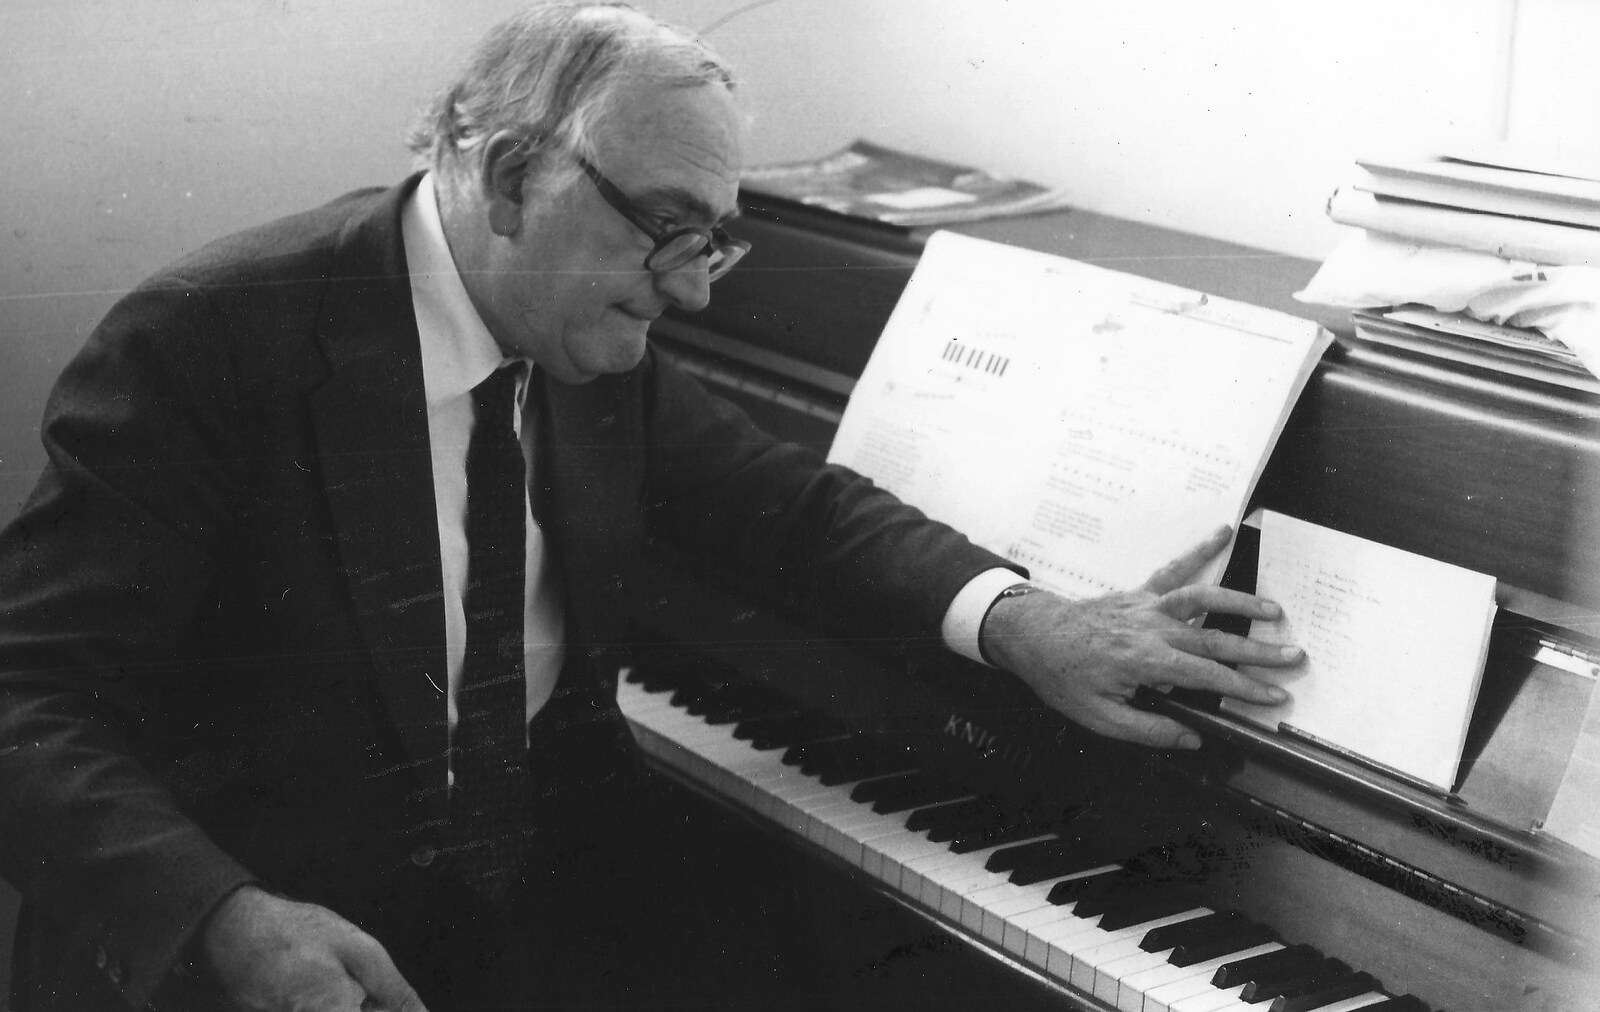 Nosher's sometime piano teacher, in the music portakabins from Learning Black-and-White Photography, Brockenhurst College, Hampshire - 10th March 1985